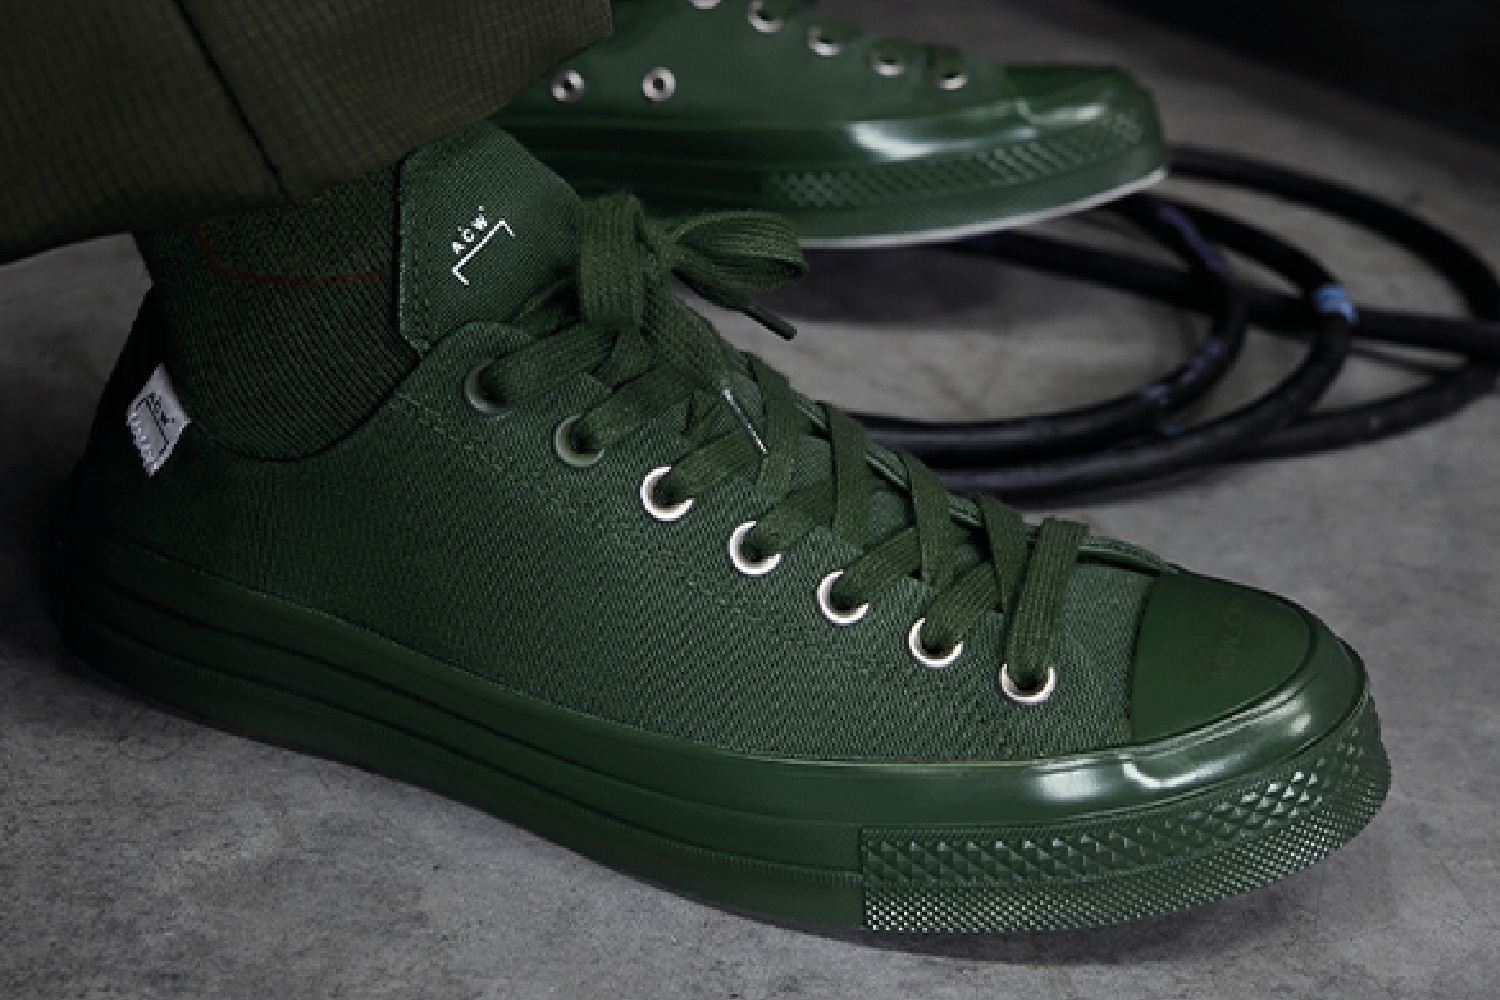 Limited-edition A-COLD-WALL* x Converse Chuck 70 is on the way